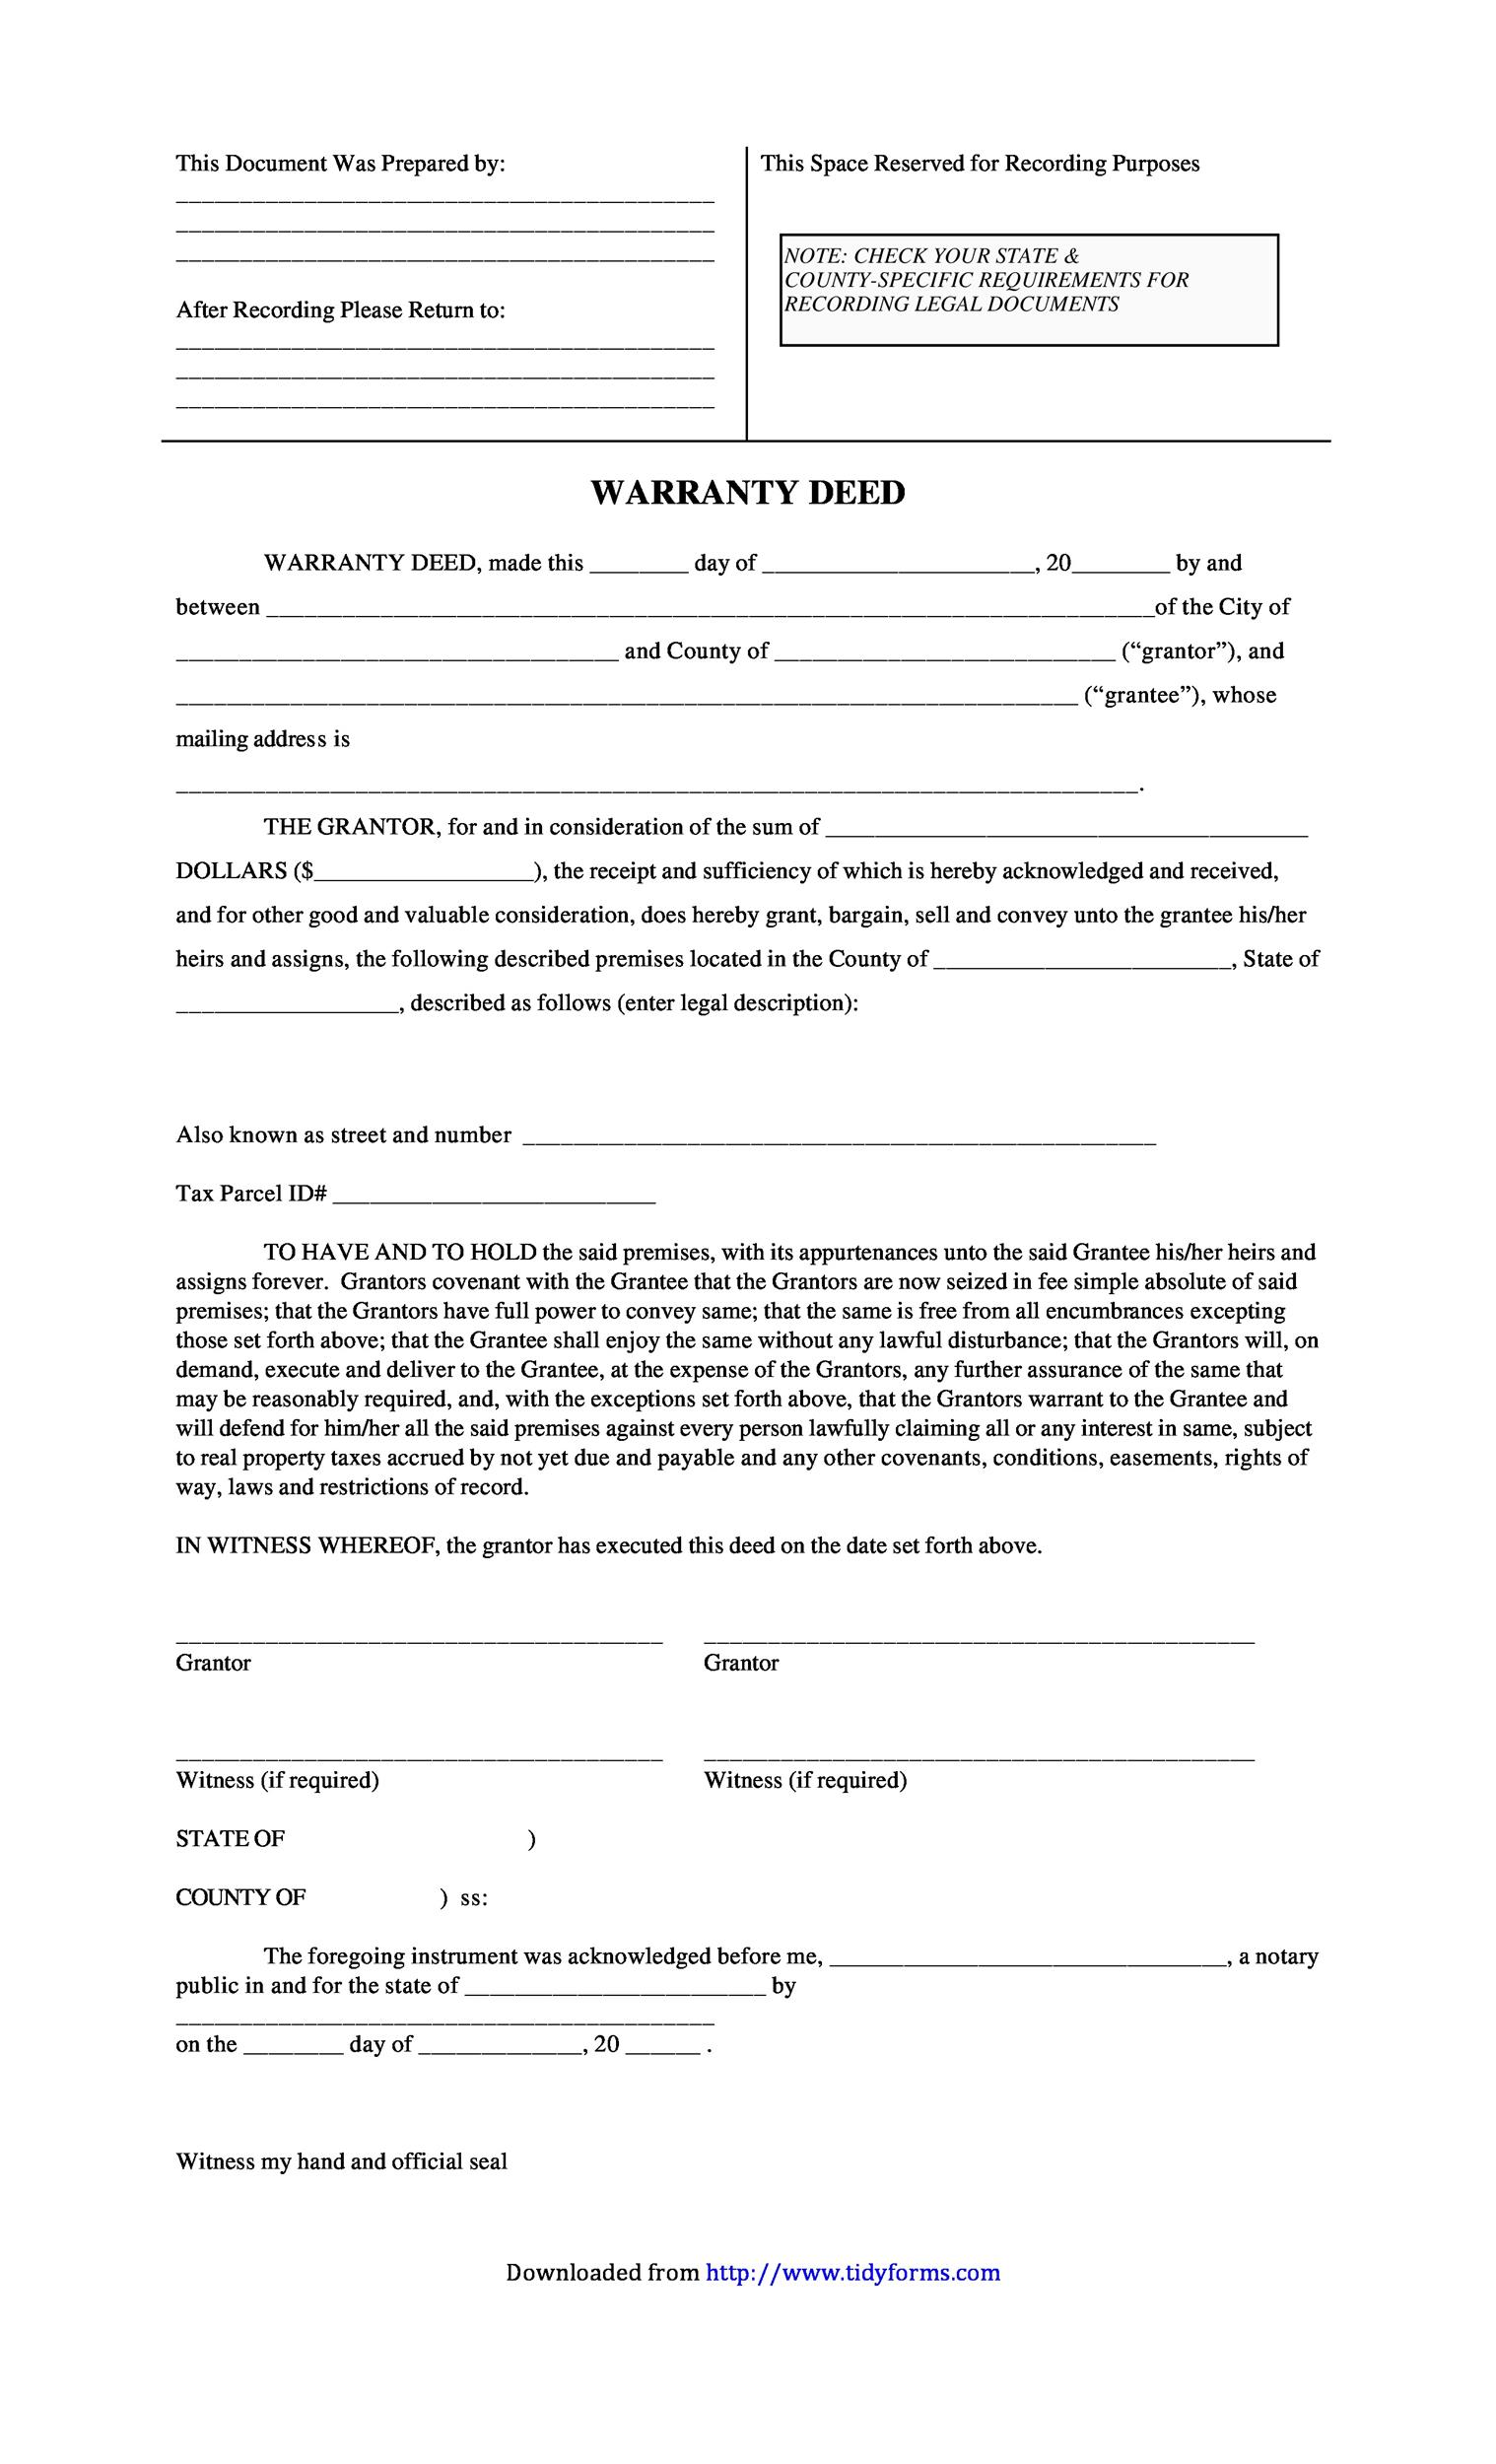 40-warranty-deed-templates-forms-general-special-template-lab